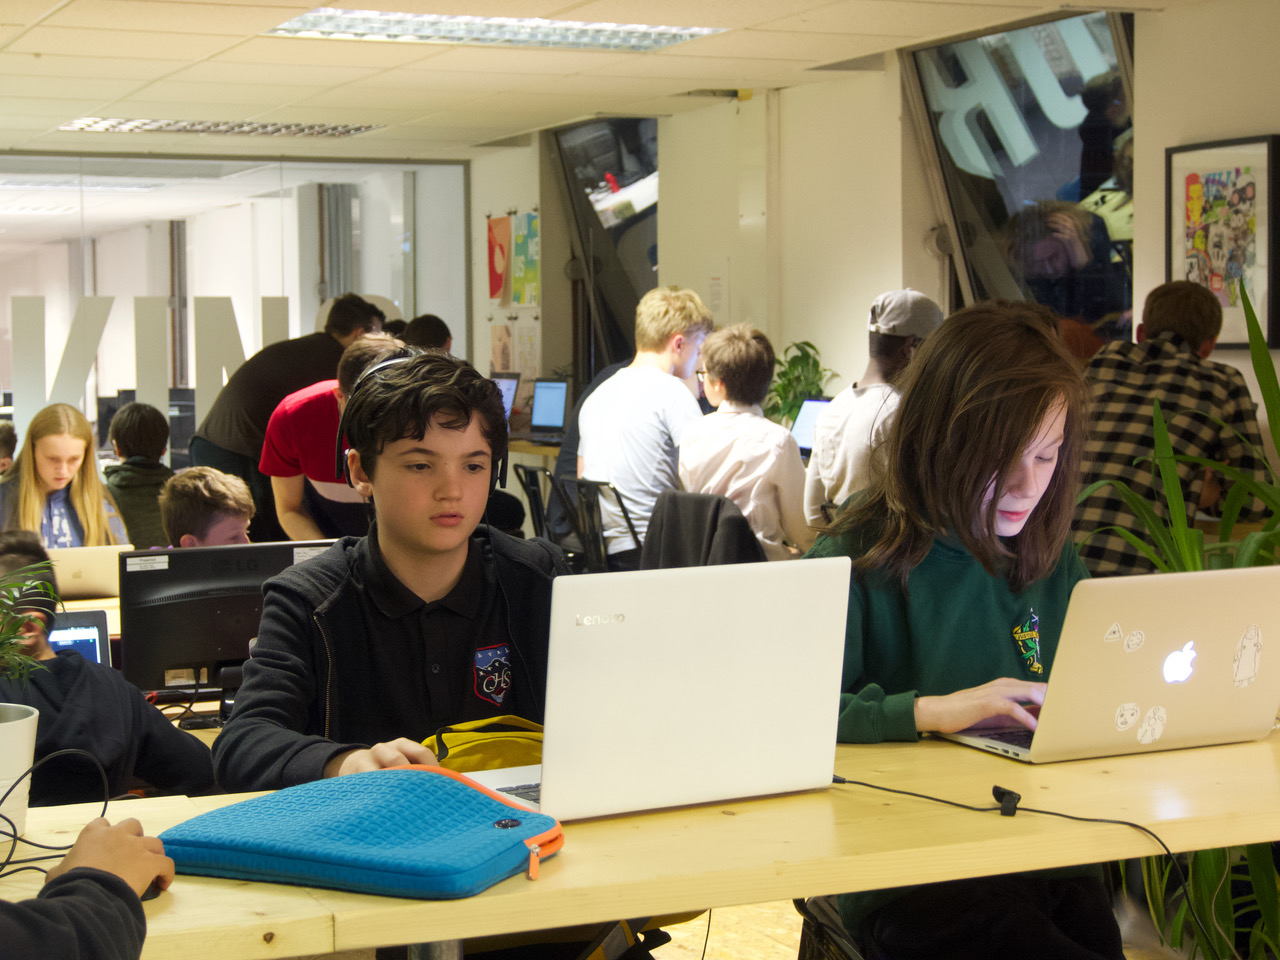 Greenshoots: Prewired secures funding from Creative Informatics to move coding clubs online